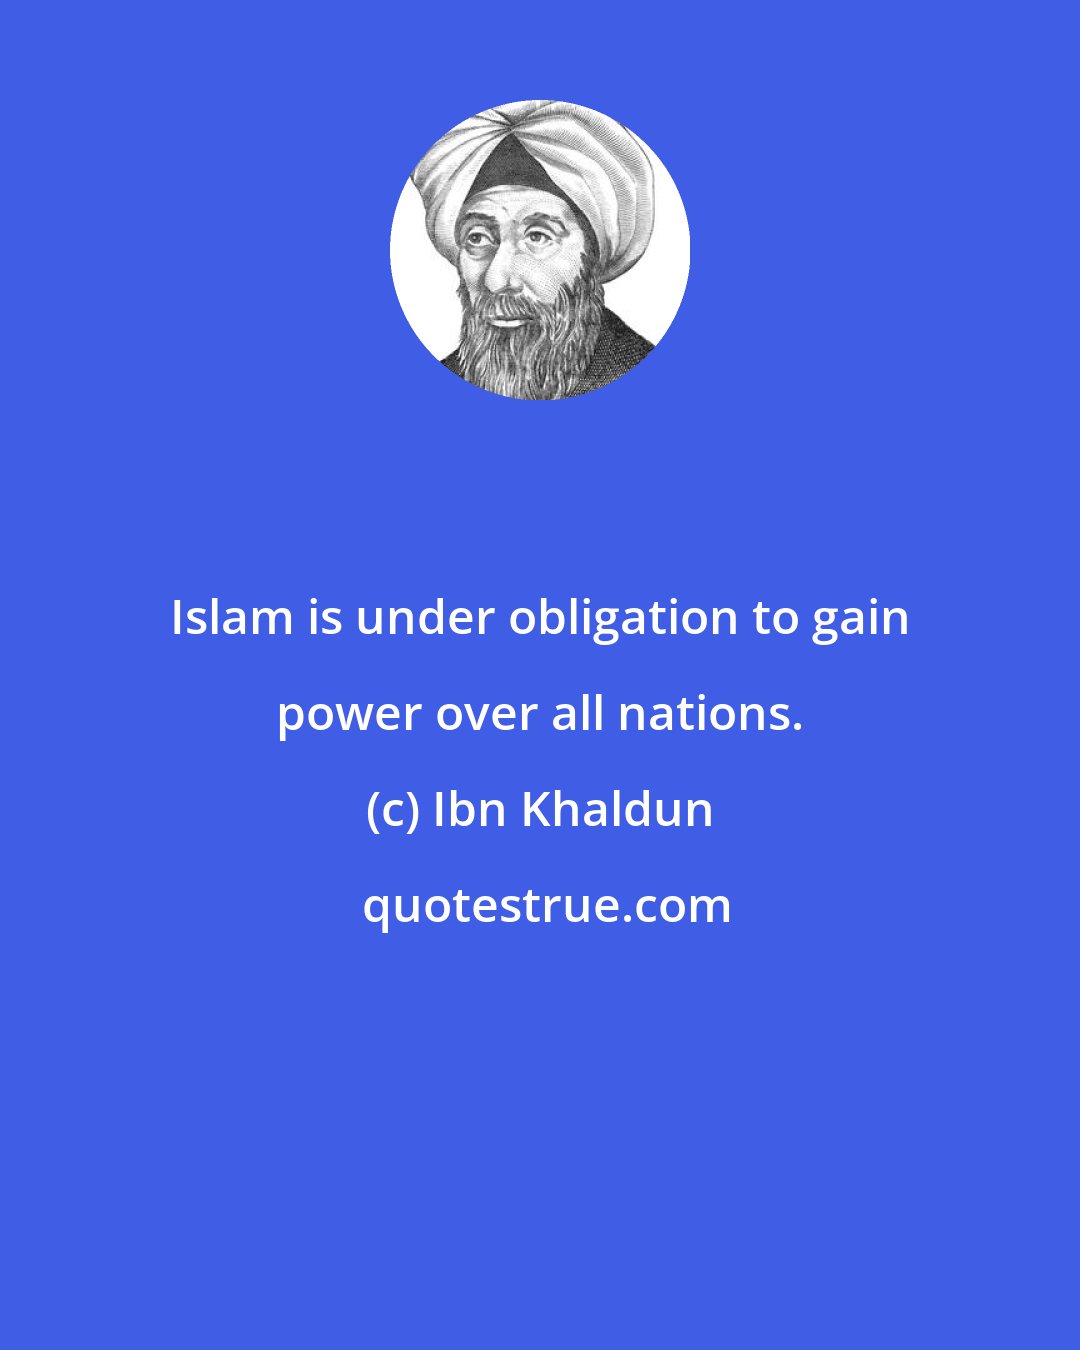 Ibn Khaldun: Islam is under obligation to gain power over all nations.